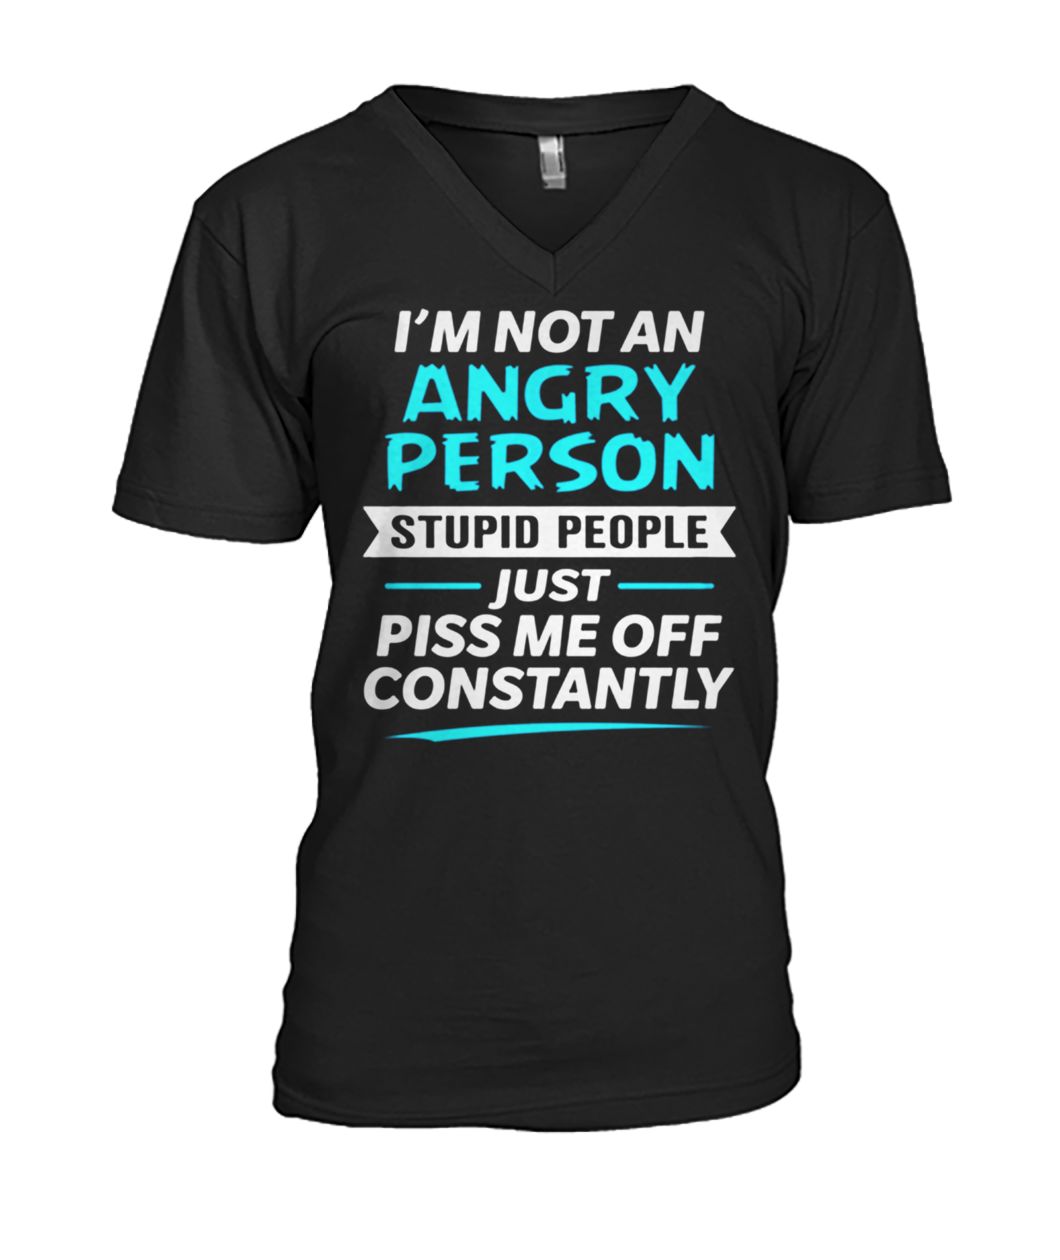 I'm not an angry person stupid people just piss me off constantly mens v-neck